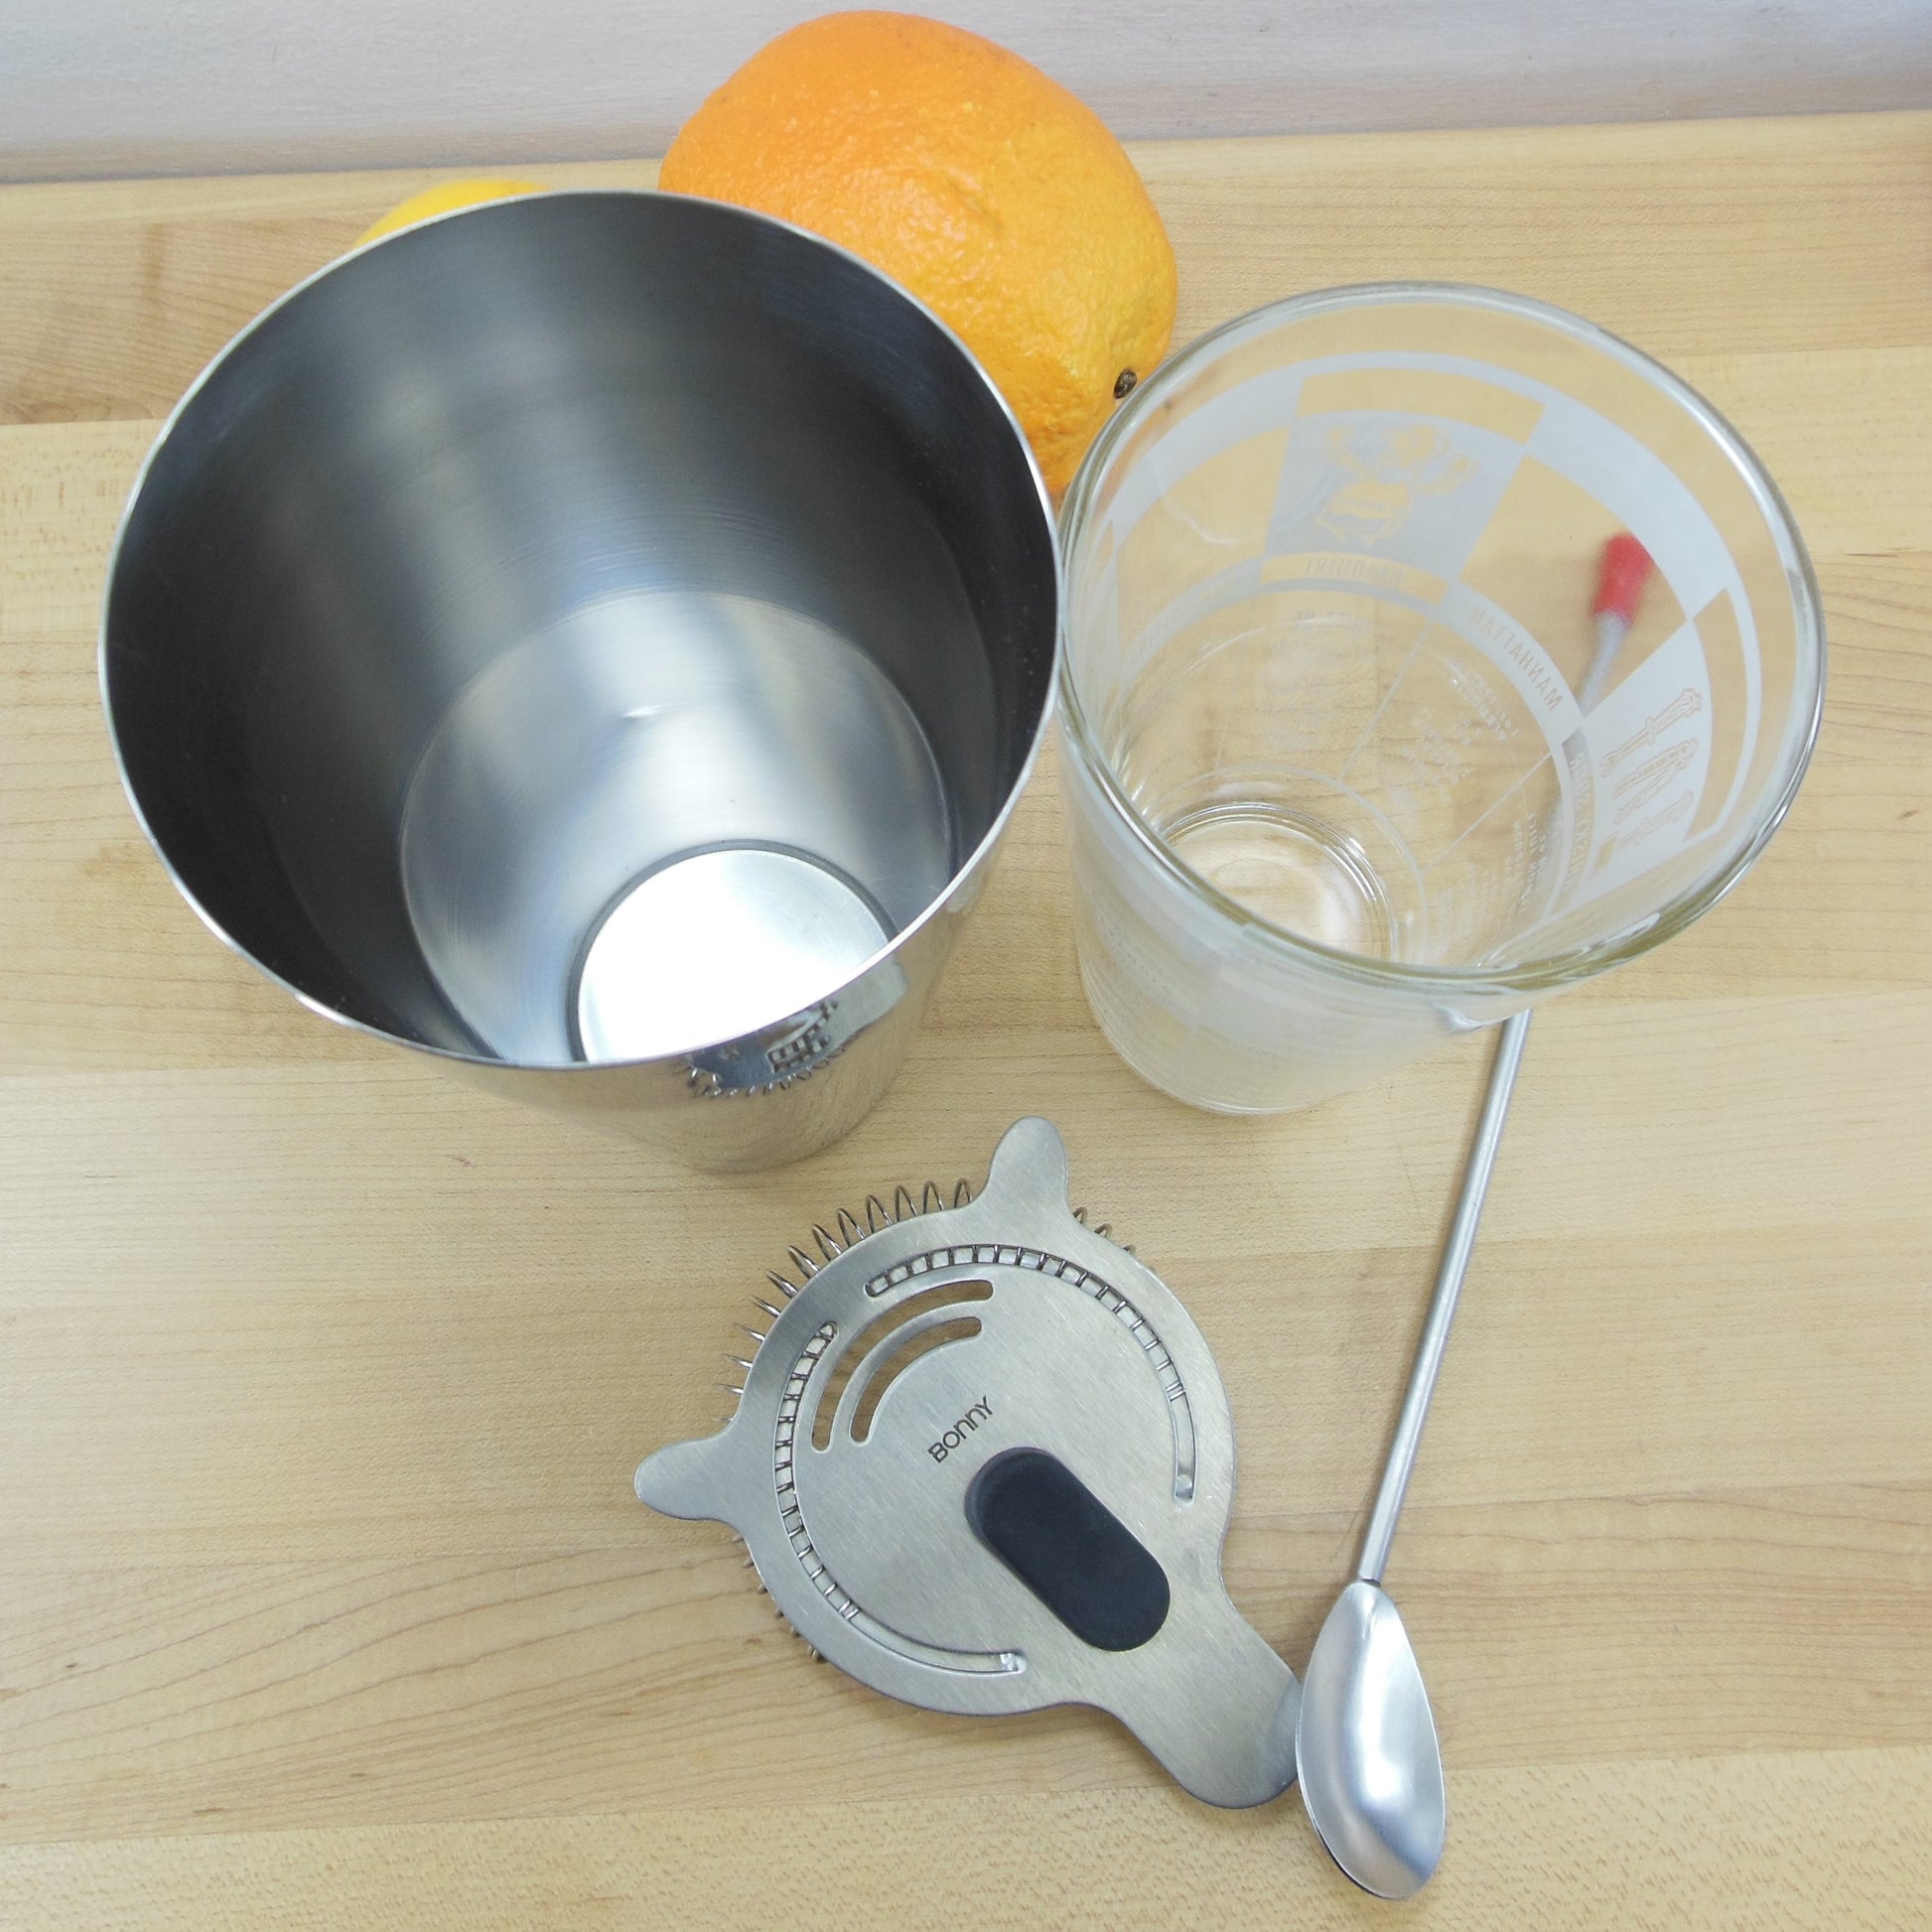 Cocktail Measuring Cup Zanetto